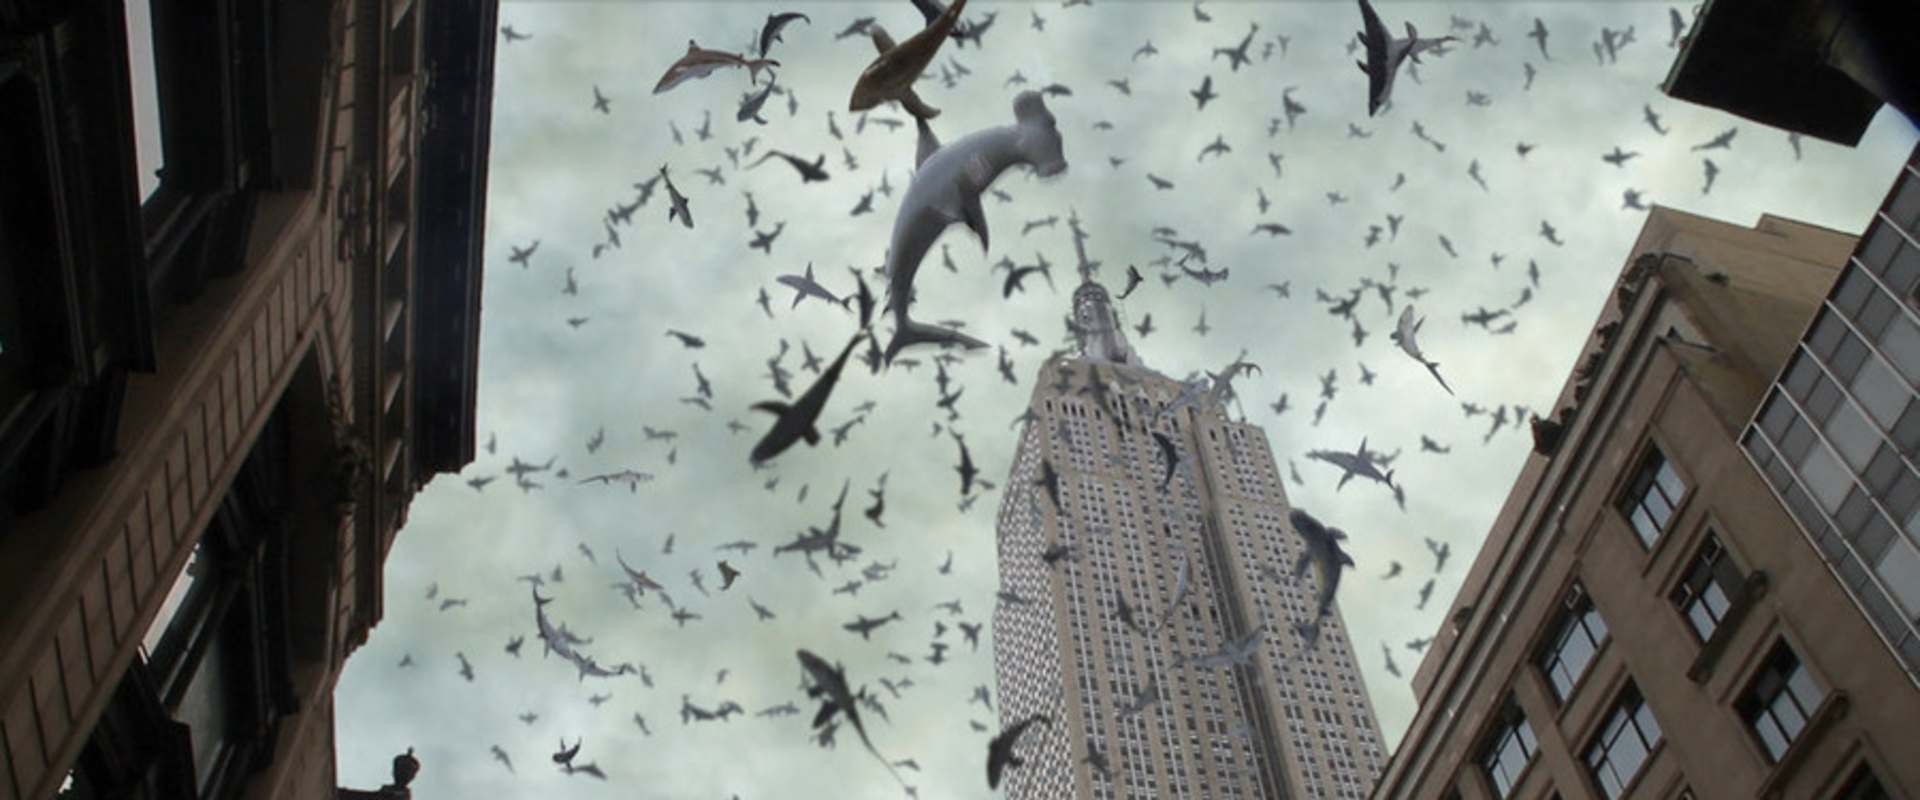 Sharknado 2: The Second One background 2